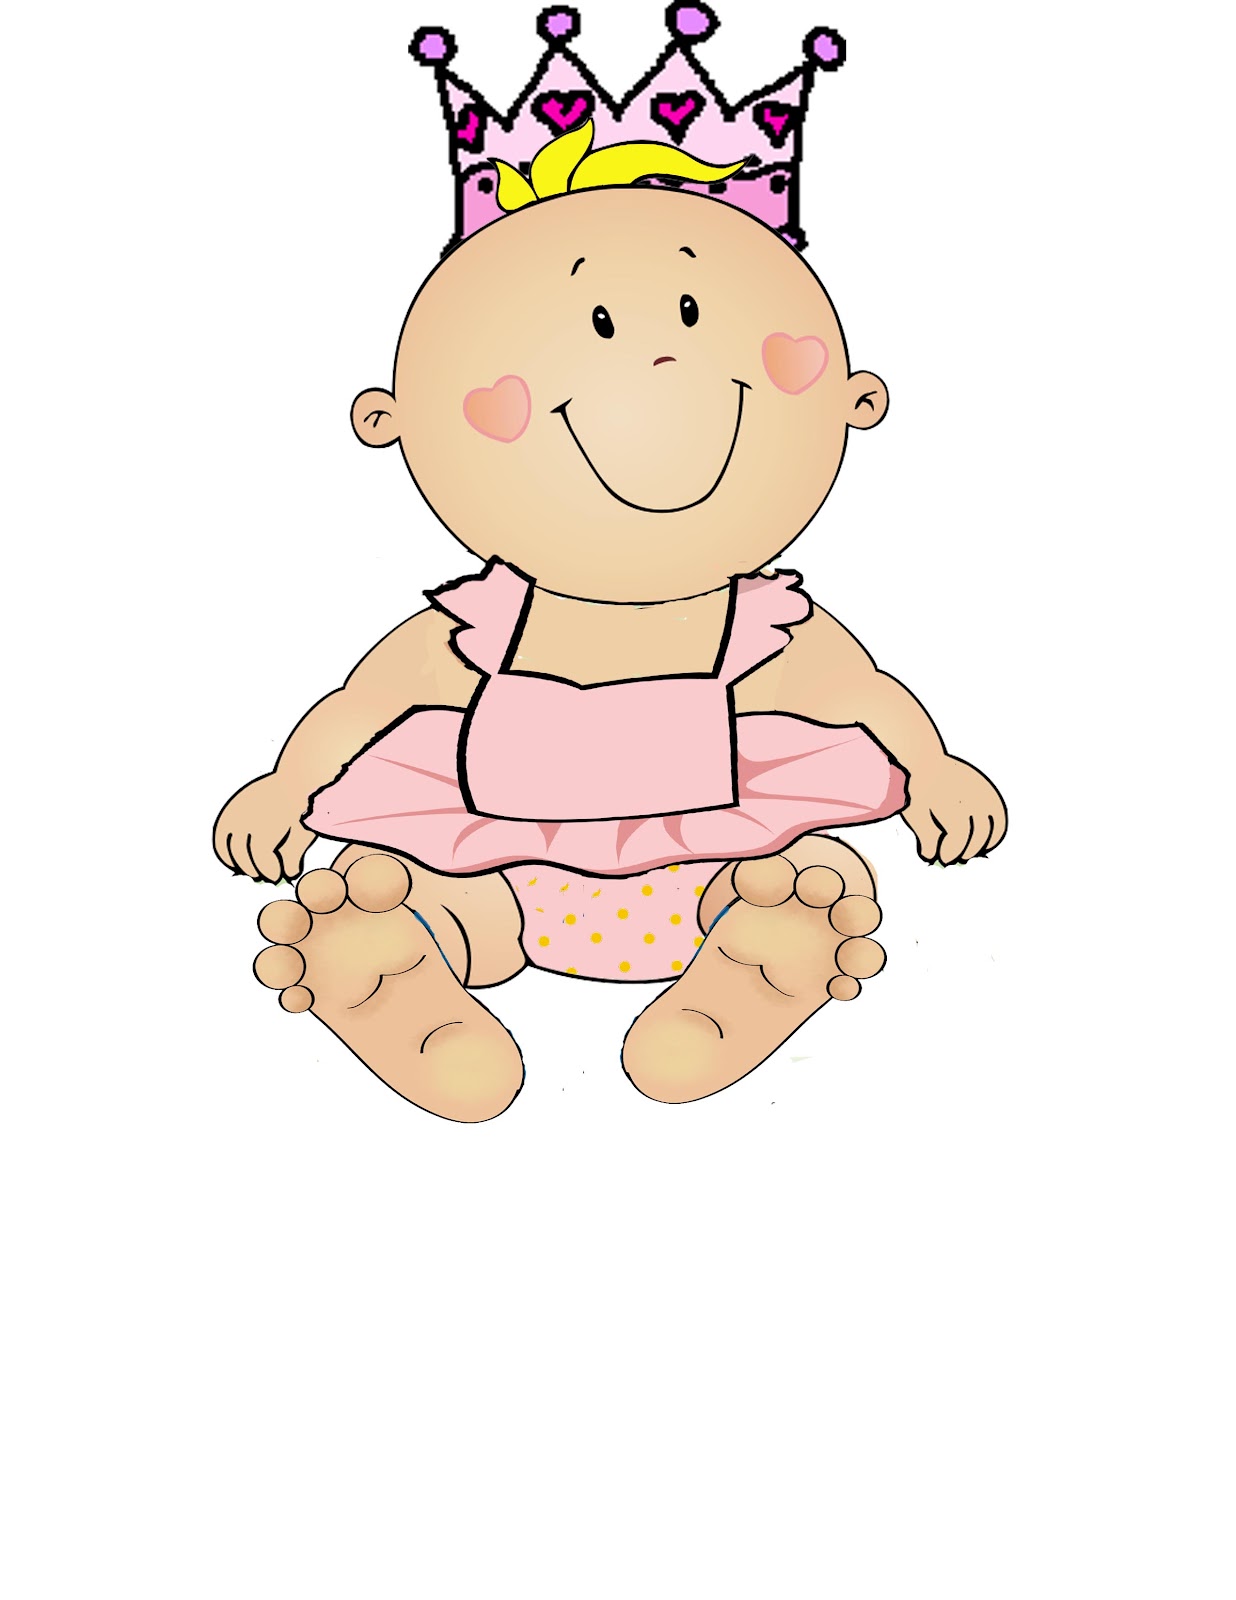 Free Baby Shower Clip Art For Invitations - Clipart library